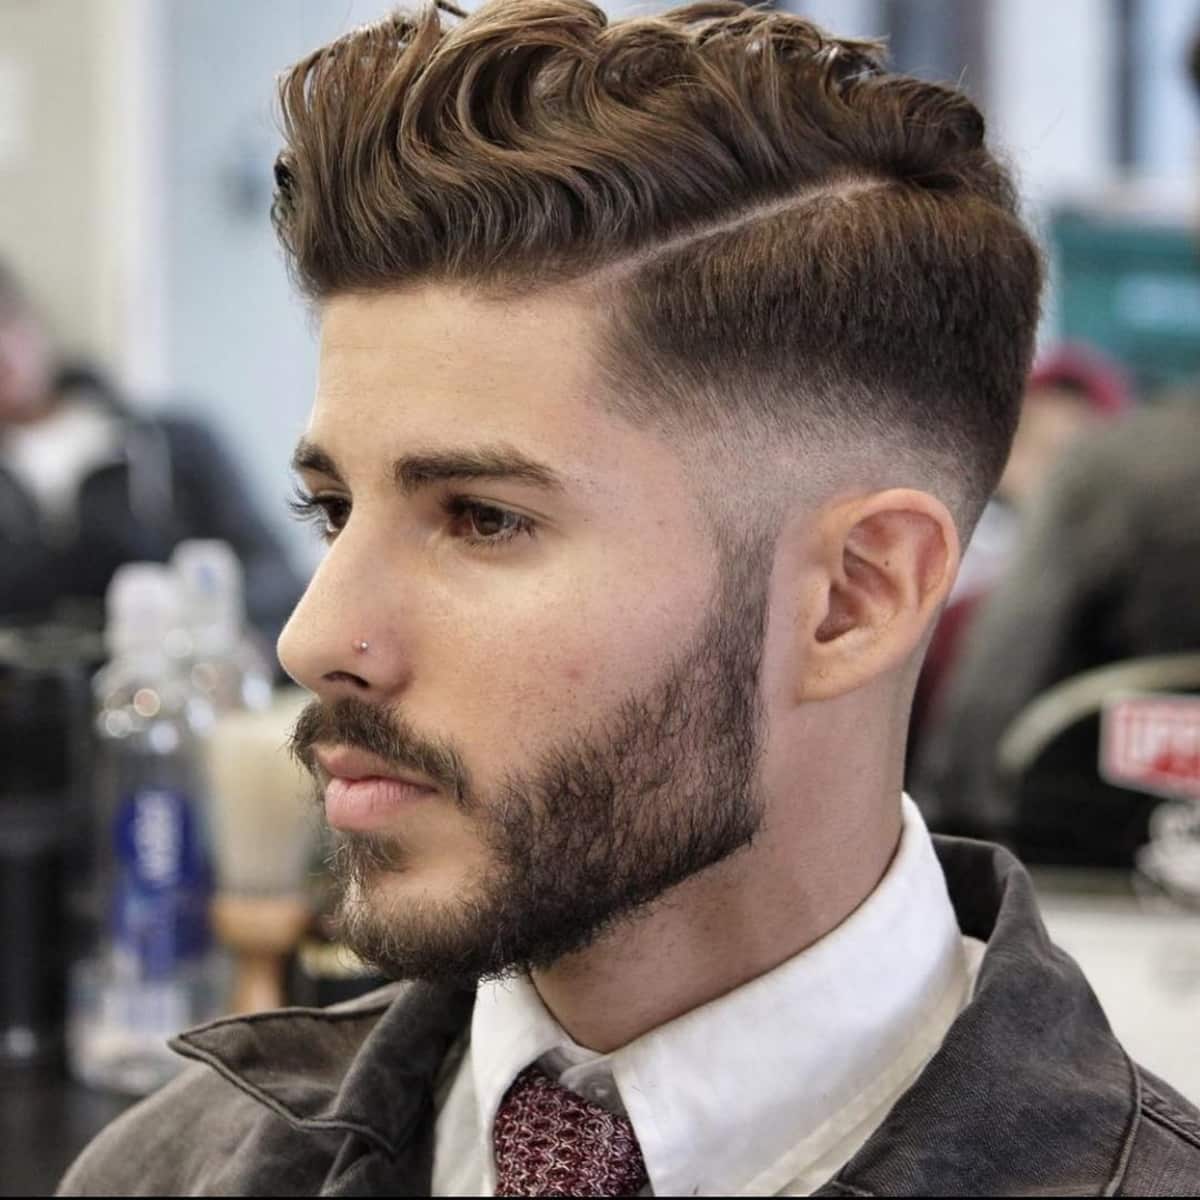 Stylish side part style for men with wavy hair